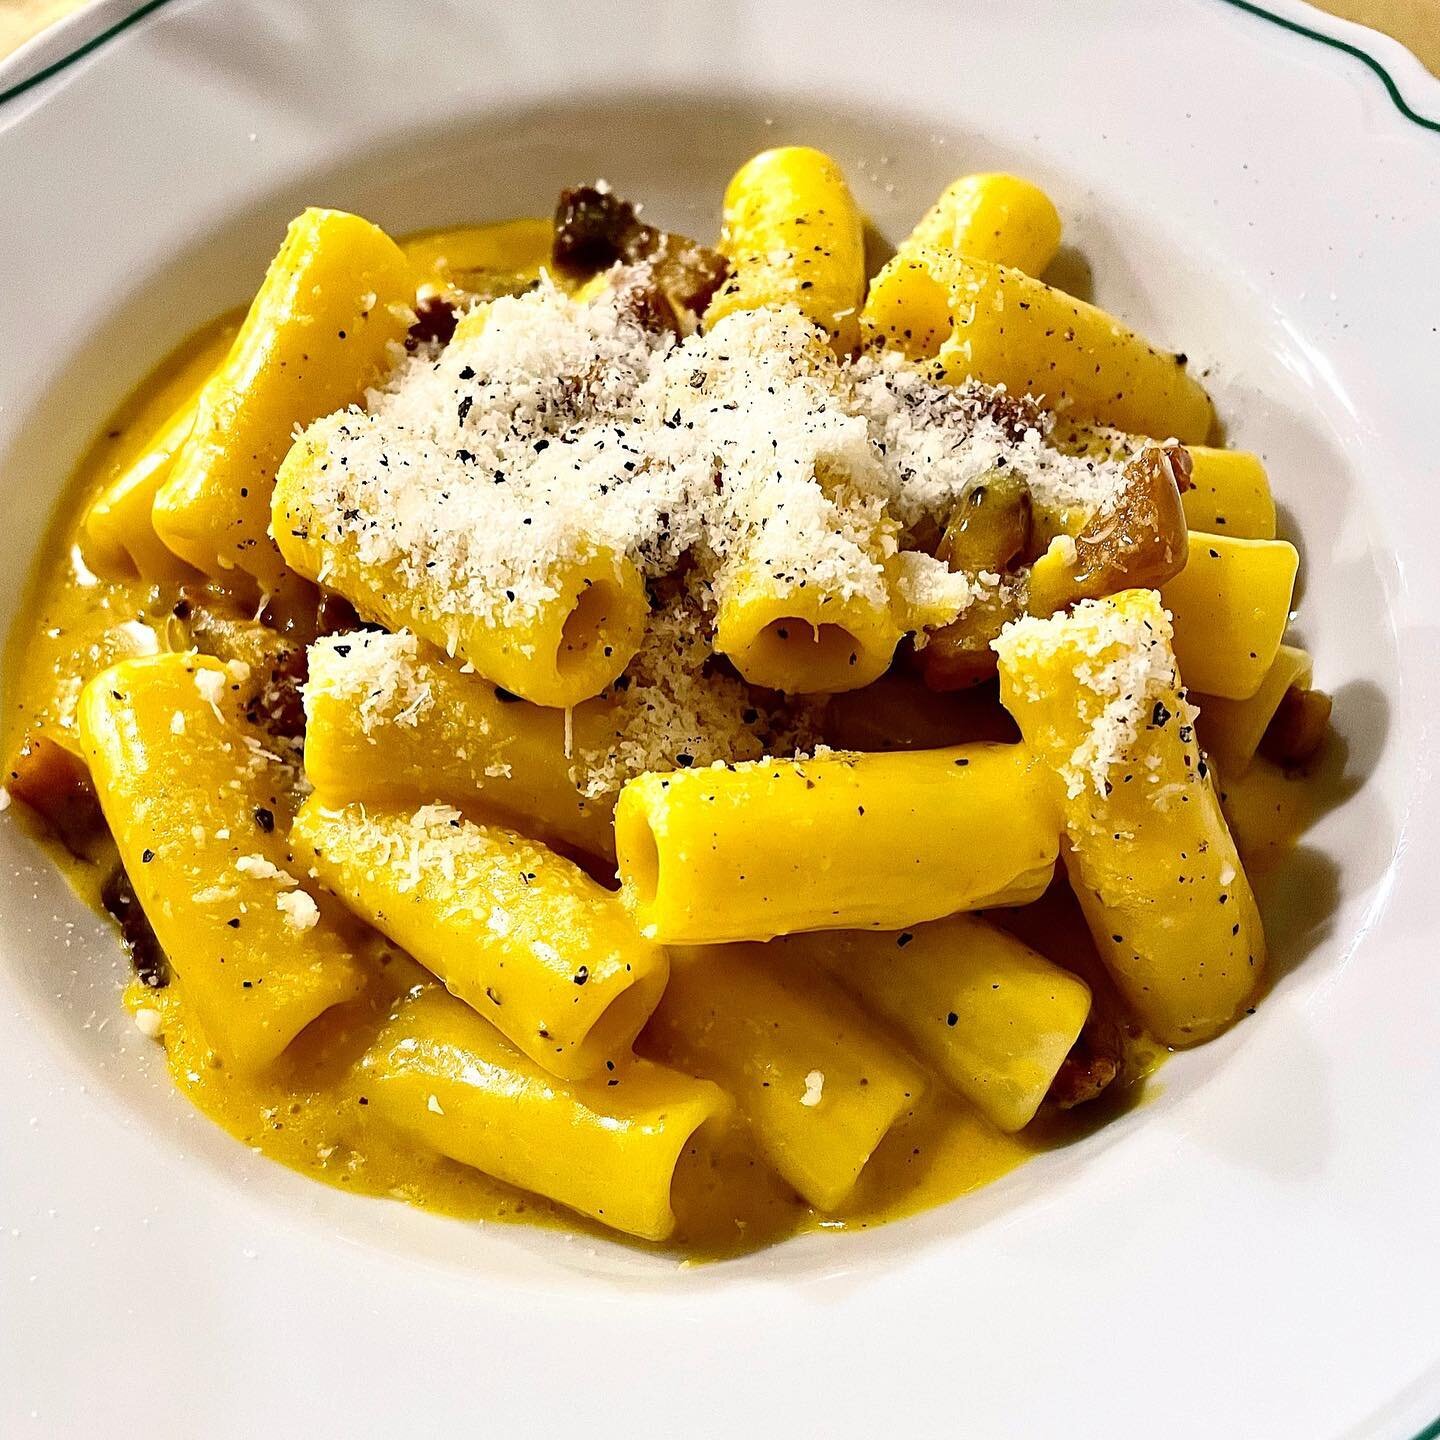 On my first night in Rome i went to Pietro Valentini for some traditional Roman dishes. On my second night, I wanted something more modern so I booked a table at Trattoria SantoPalato where chef Sarah Cicolini serves up her versions of some Italian c